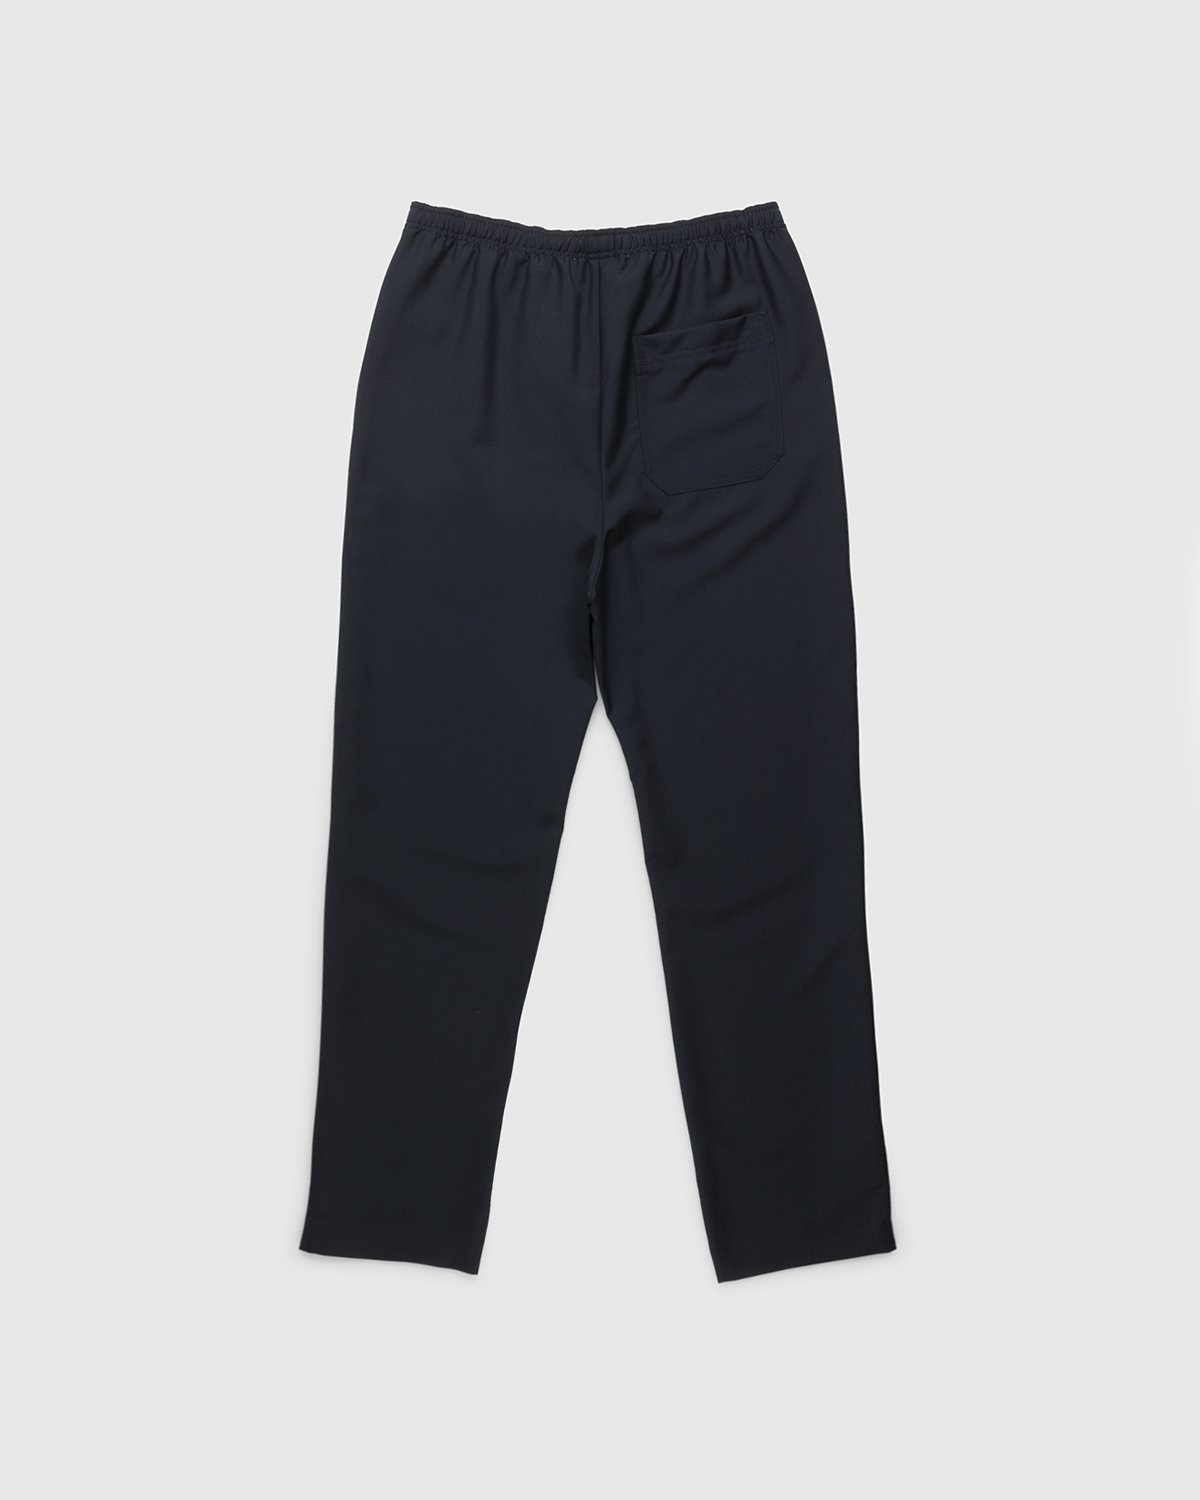 Acne Studios – Mohair Blend Drawstring Trousers Navy - Trousers - Blue - Image 2